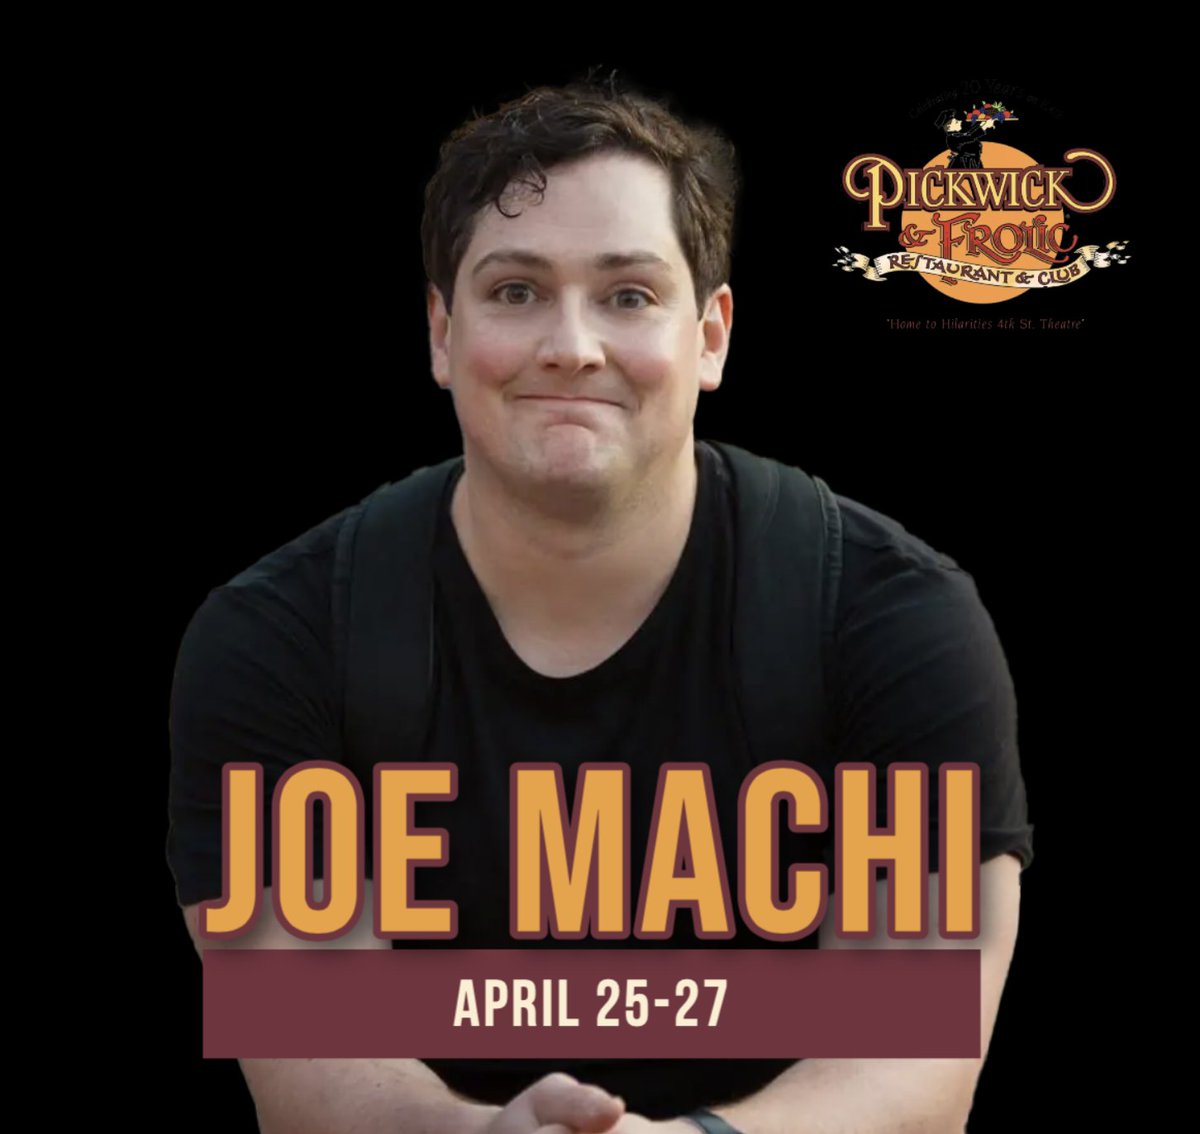 We're kicking off the weekend at 7PM with @joemachi and tickets are still available! 🎟: pickwickandfrolic.com/2015/04/joe-ma…